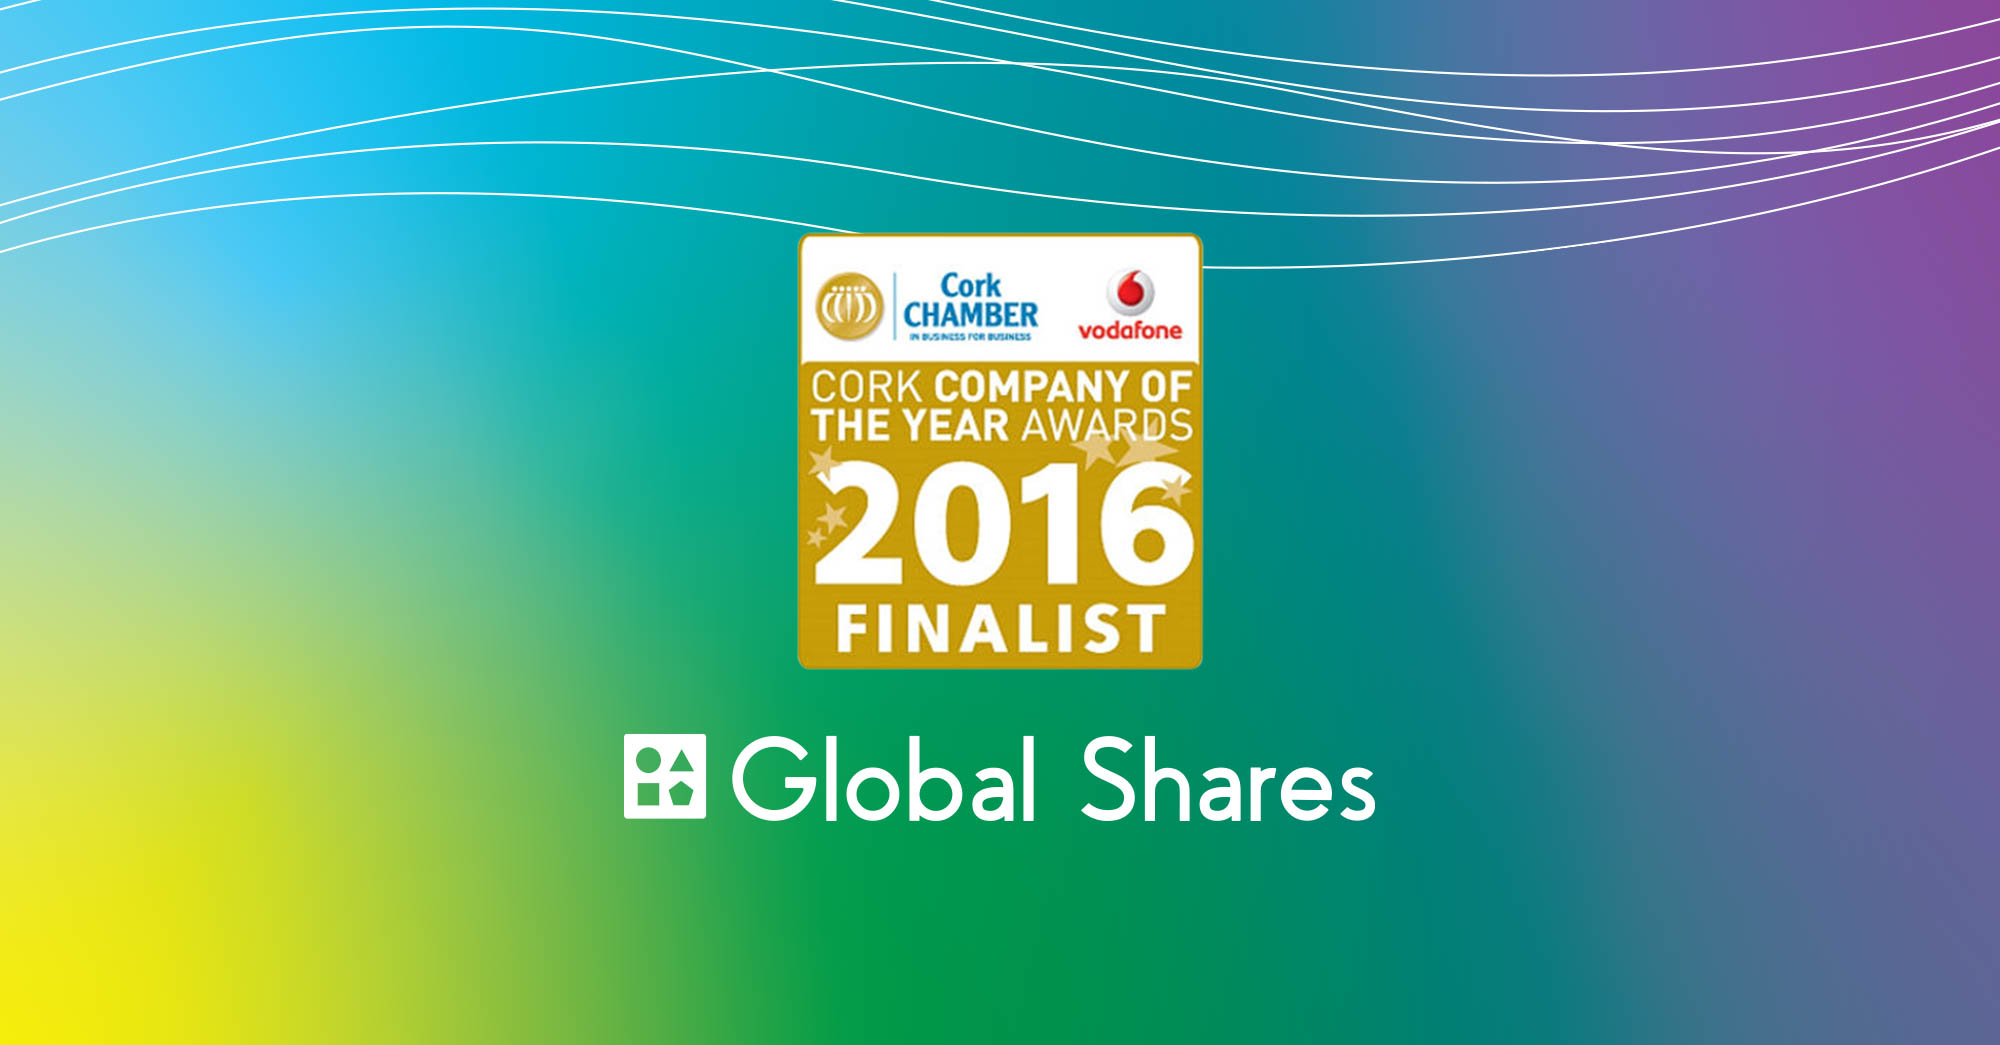 Finalist – Cork Company of the Year Awards 2016